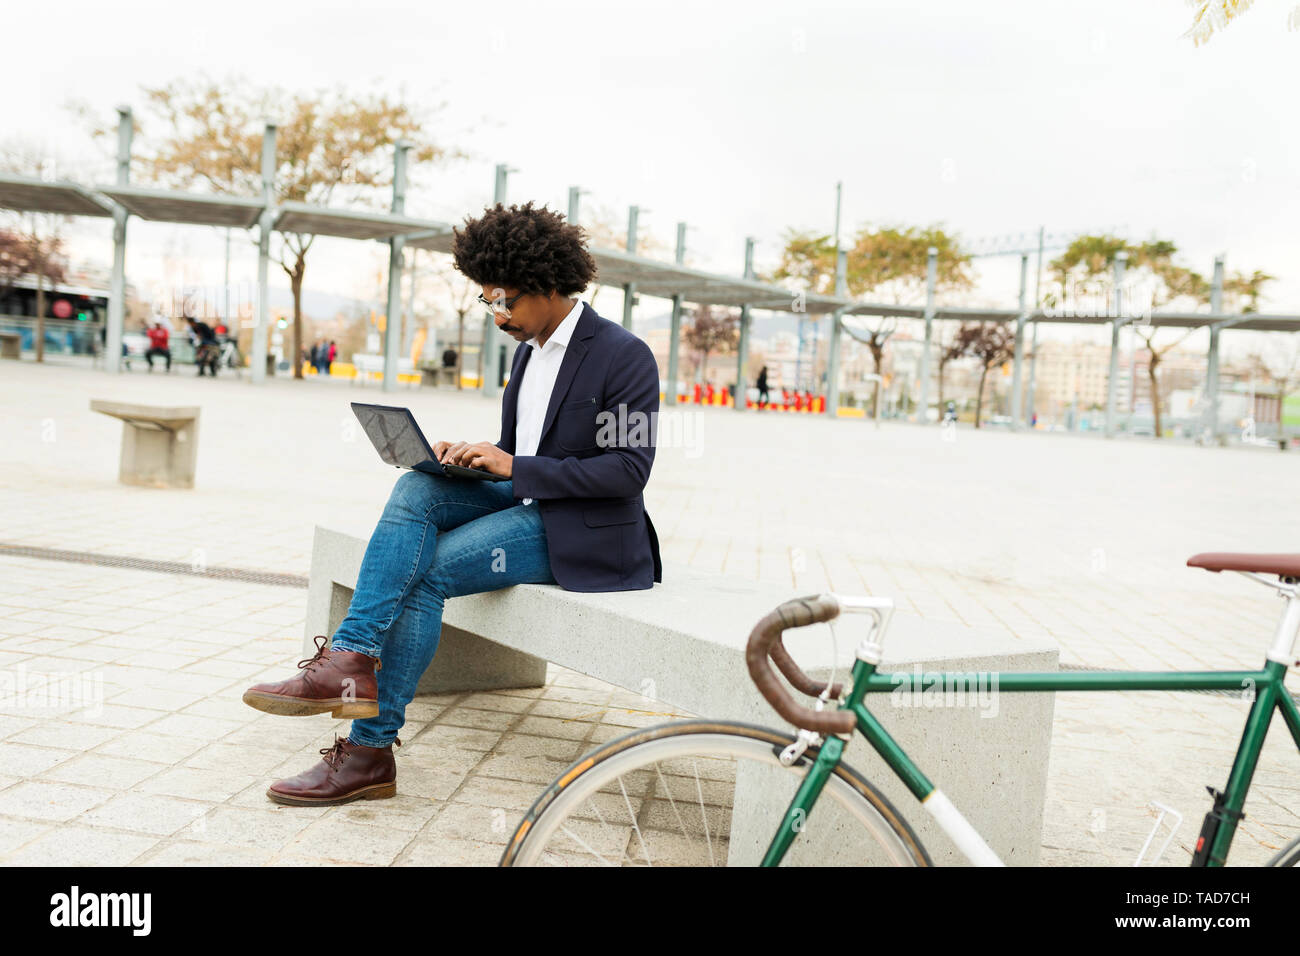 Spain, Barcelona, businessman with bicycle in the city sitting on bench using laptop Stock Photo